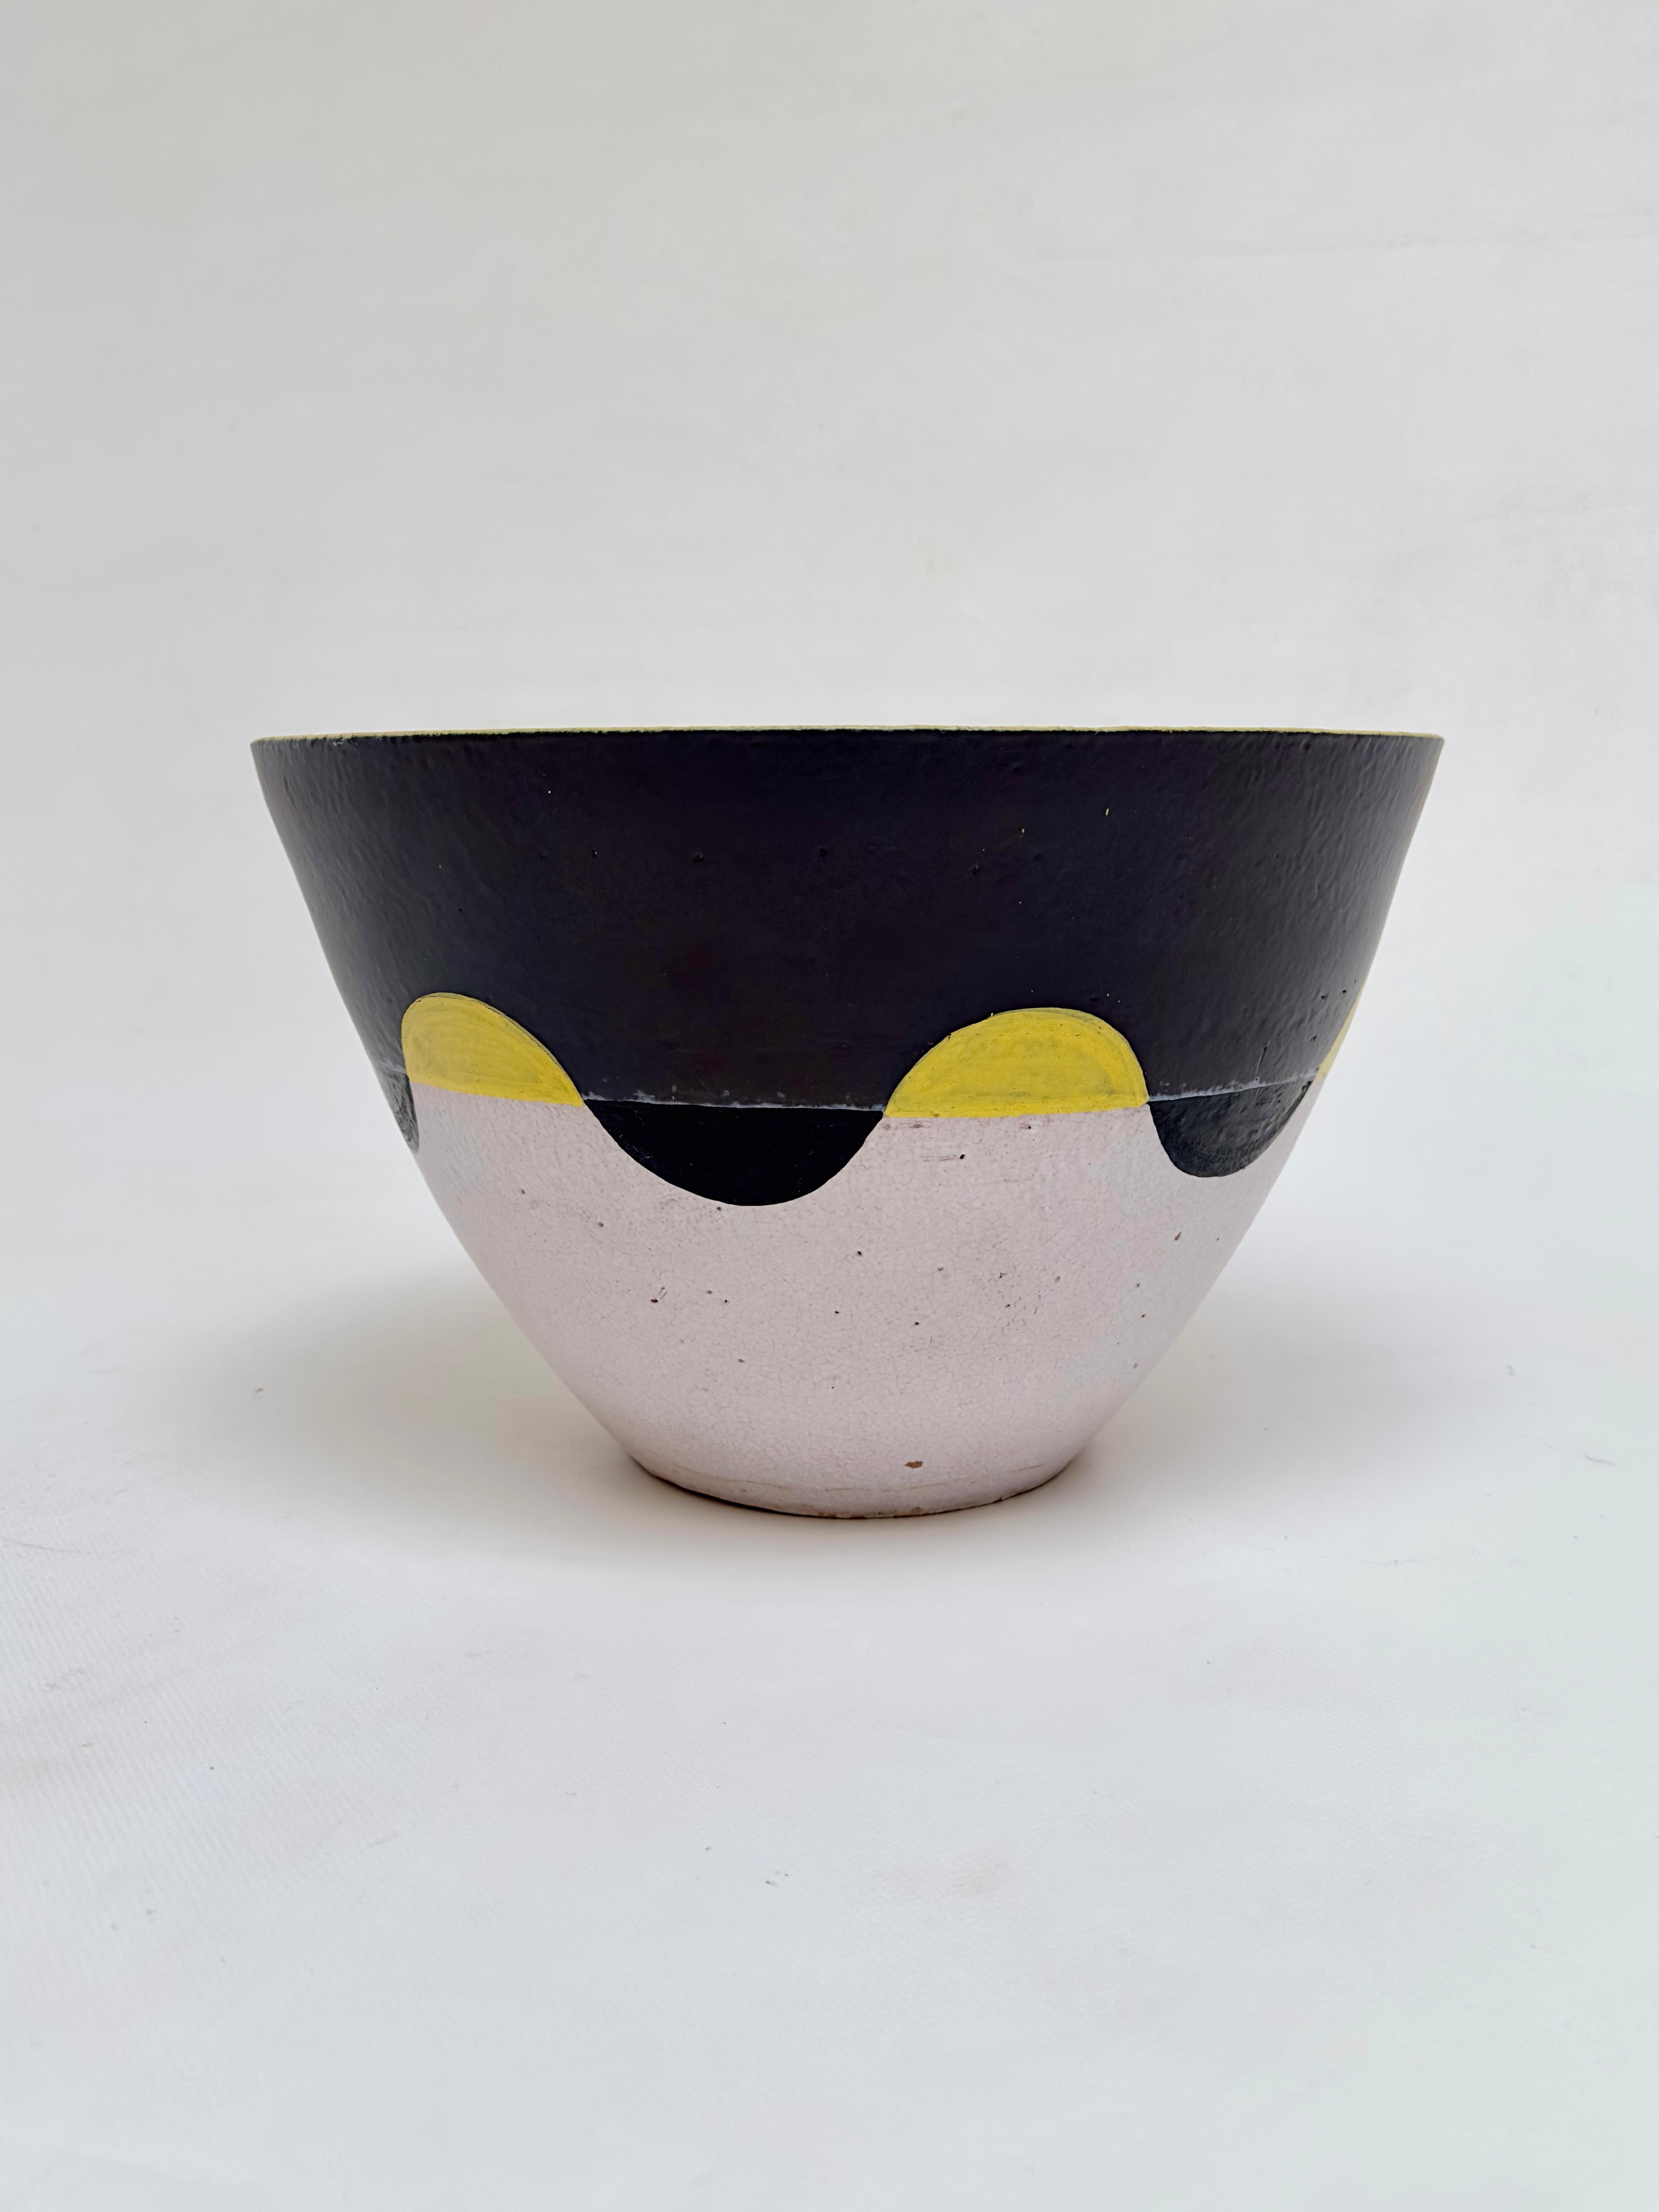 Exceptional decorative piece with generous dimensions.

Satin black and white glazes with a vibrant yellow interior characterise the universe of this Artist with sobriety and simplicity.

The piece wears the Artist stamp on beneath 